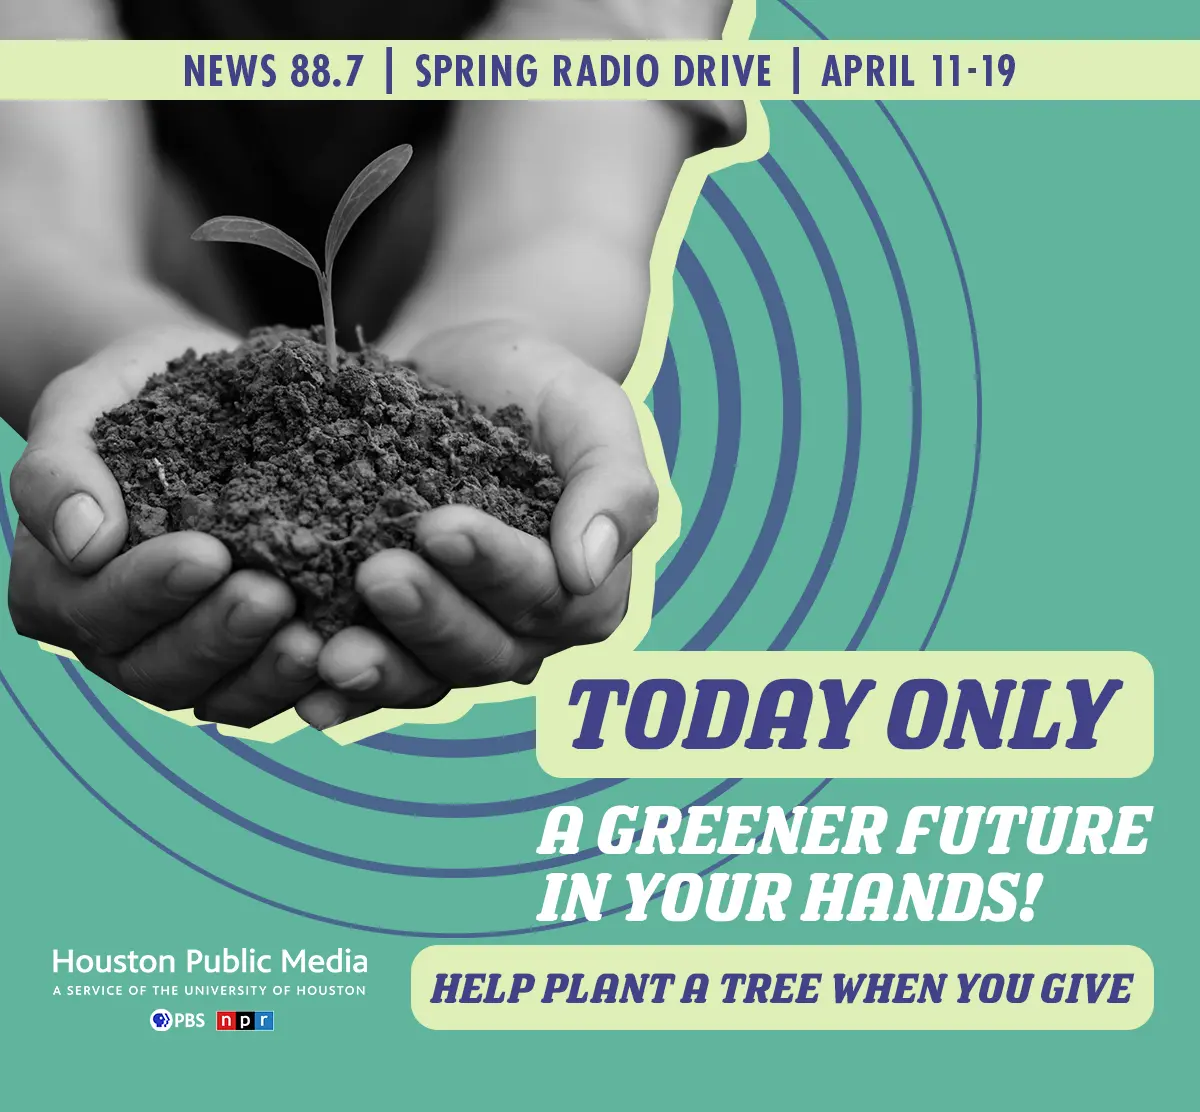 TODAY ONLY! A Greener Houston in your hands. Help plant a tree when you give!